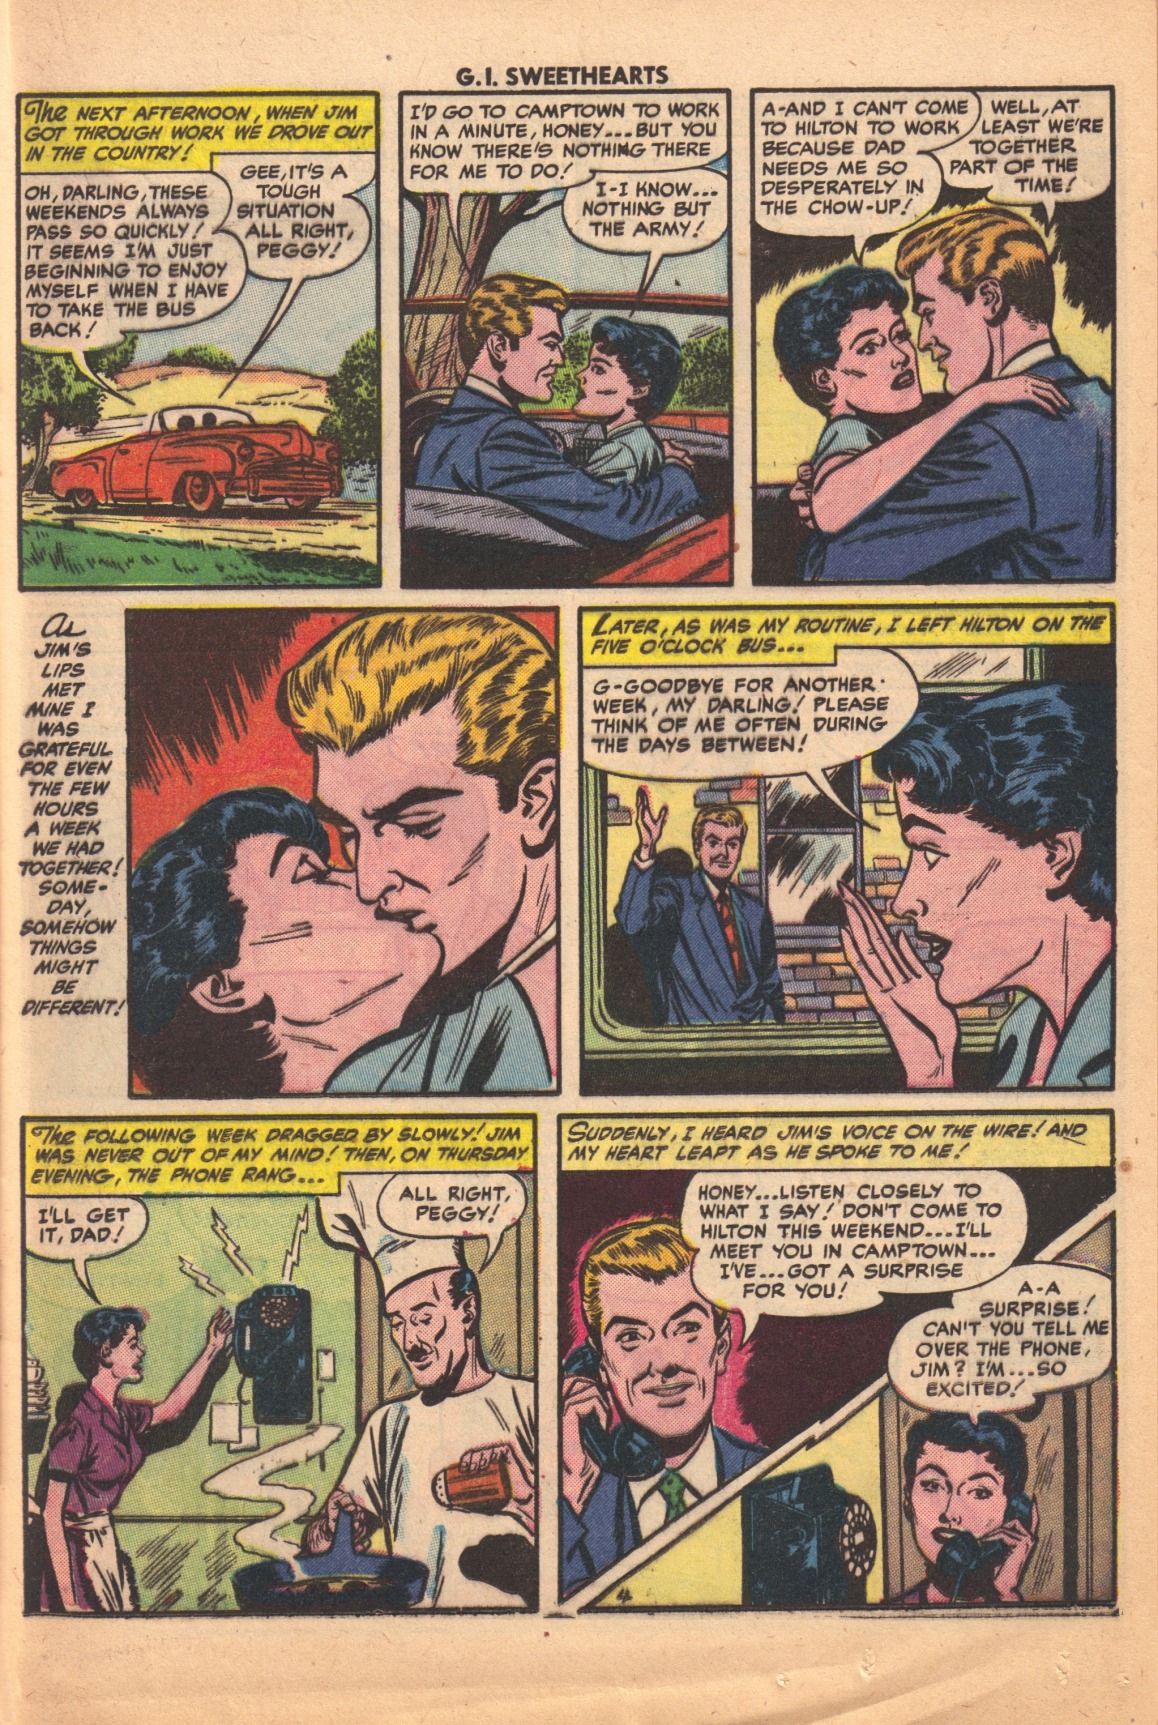 Read online G.I. Sweethearts comic -  Issue #40 - 21